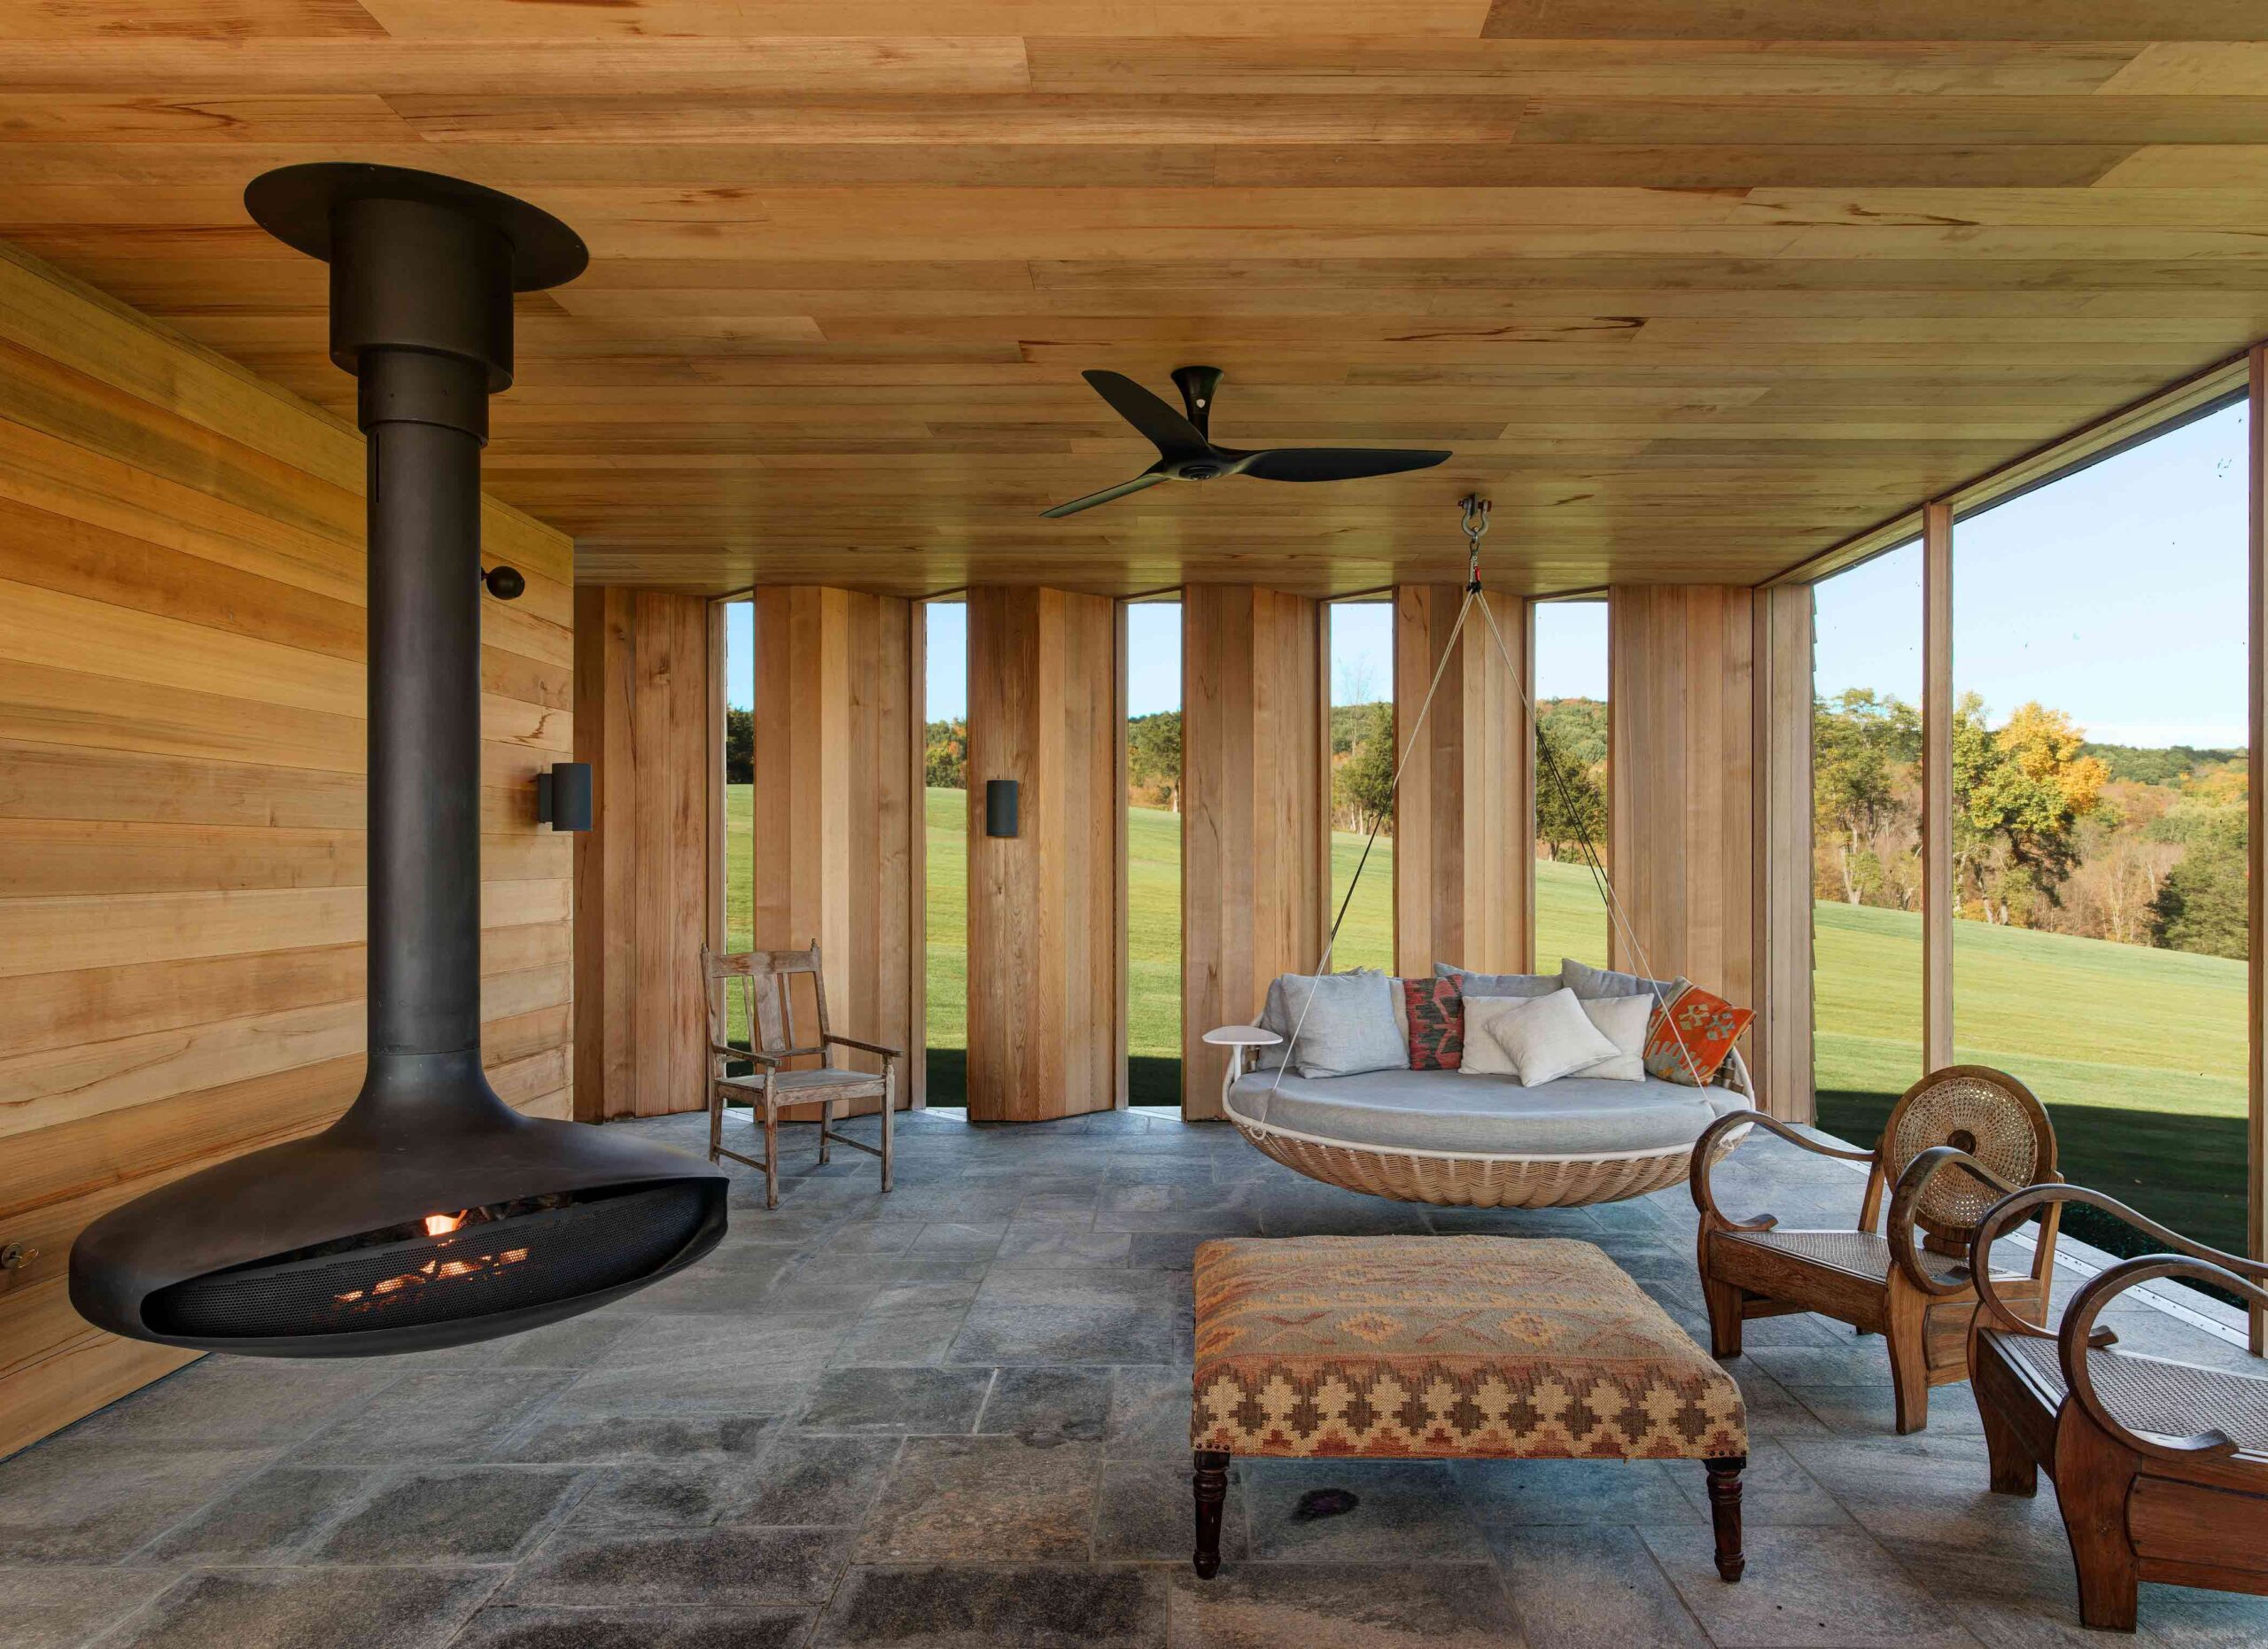 Compound in the Hudson Valley by Rangr Studio